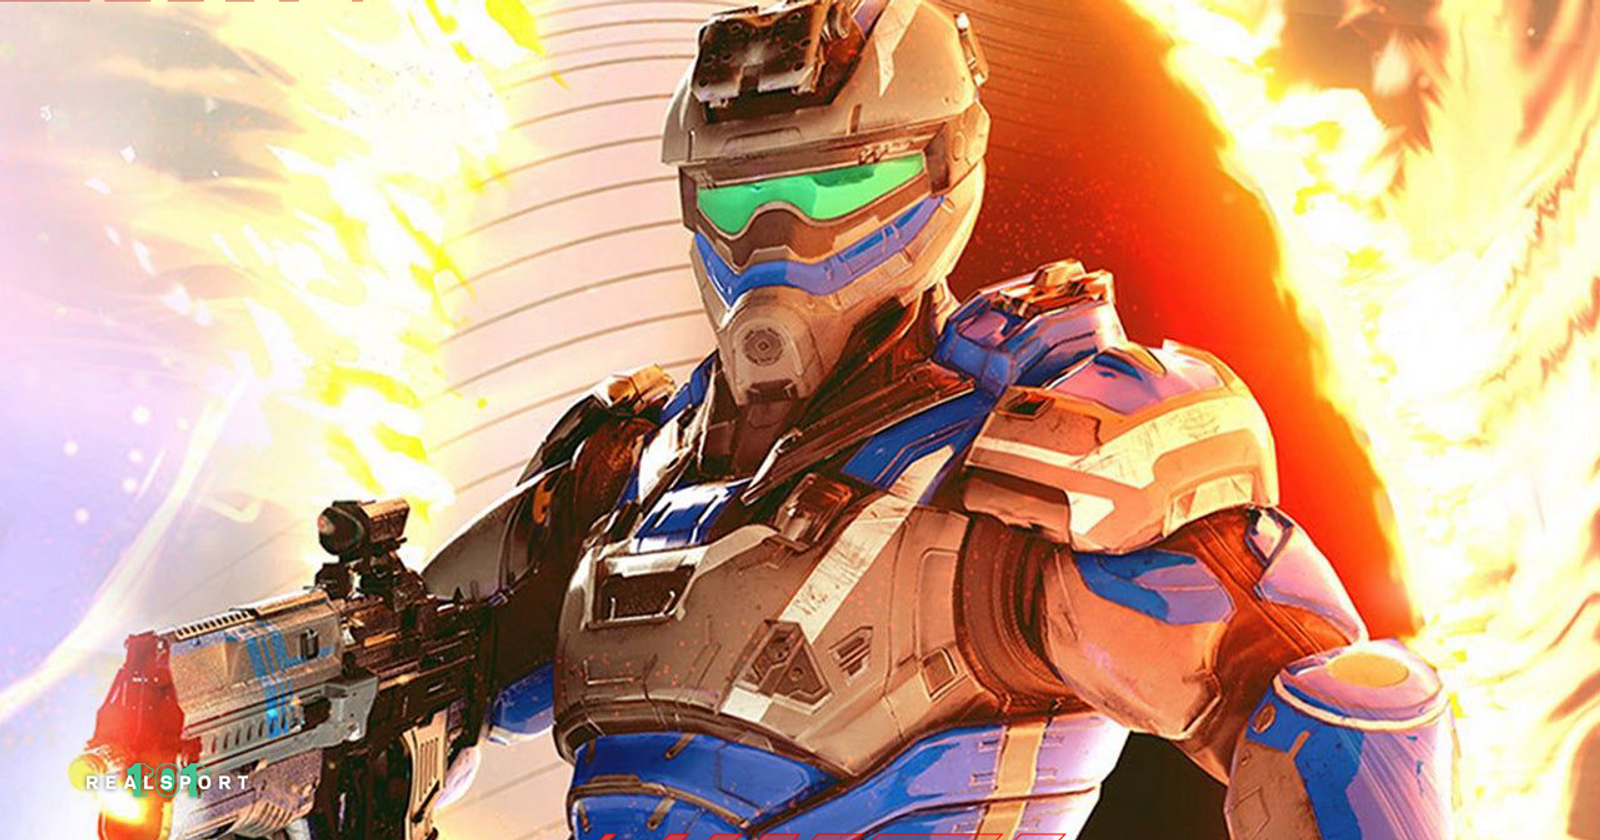 Splitgate: Arena Warfare gets a release date of May 22nd for this Halo  meets Portal free-to-play shooter - Saving Content